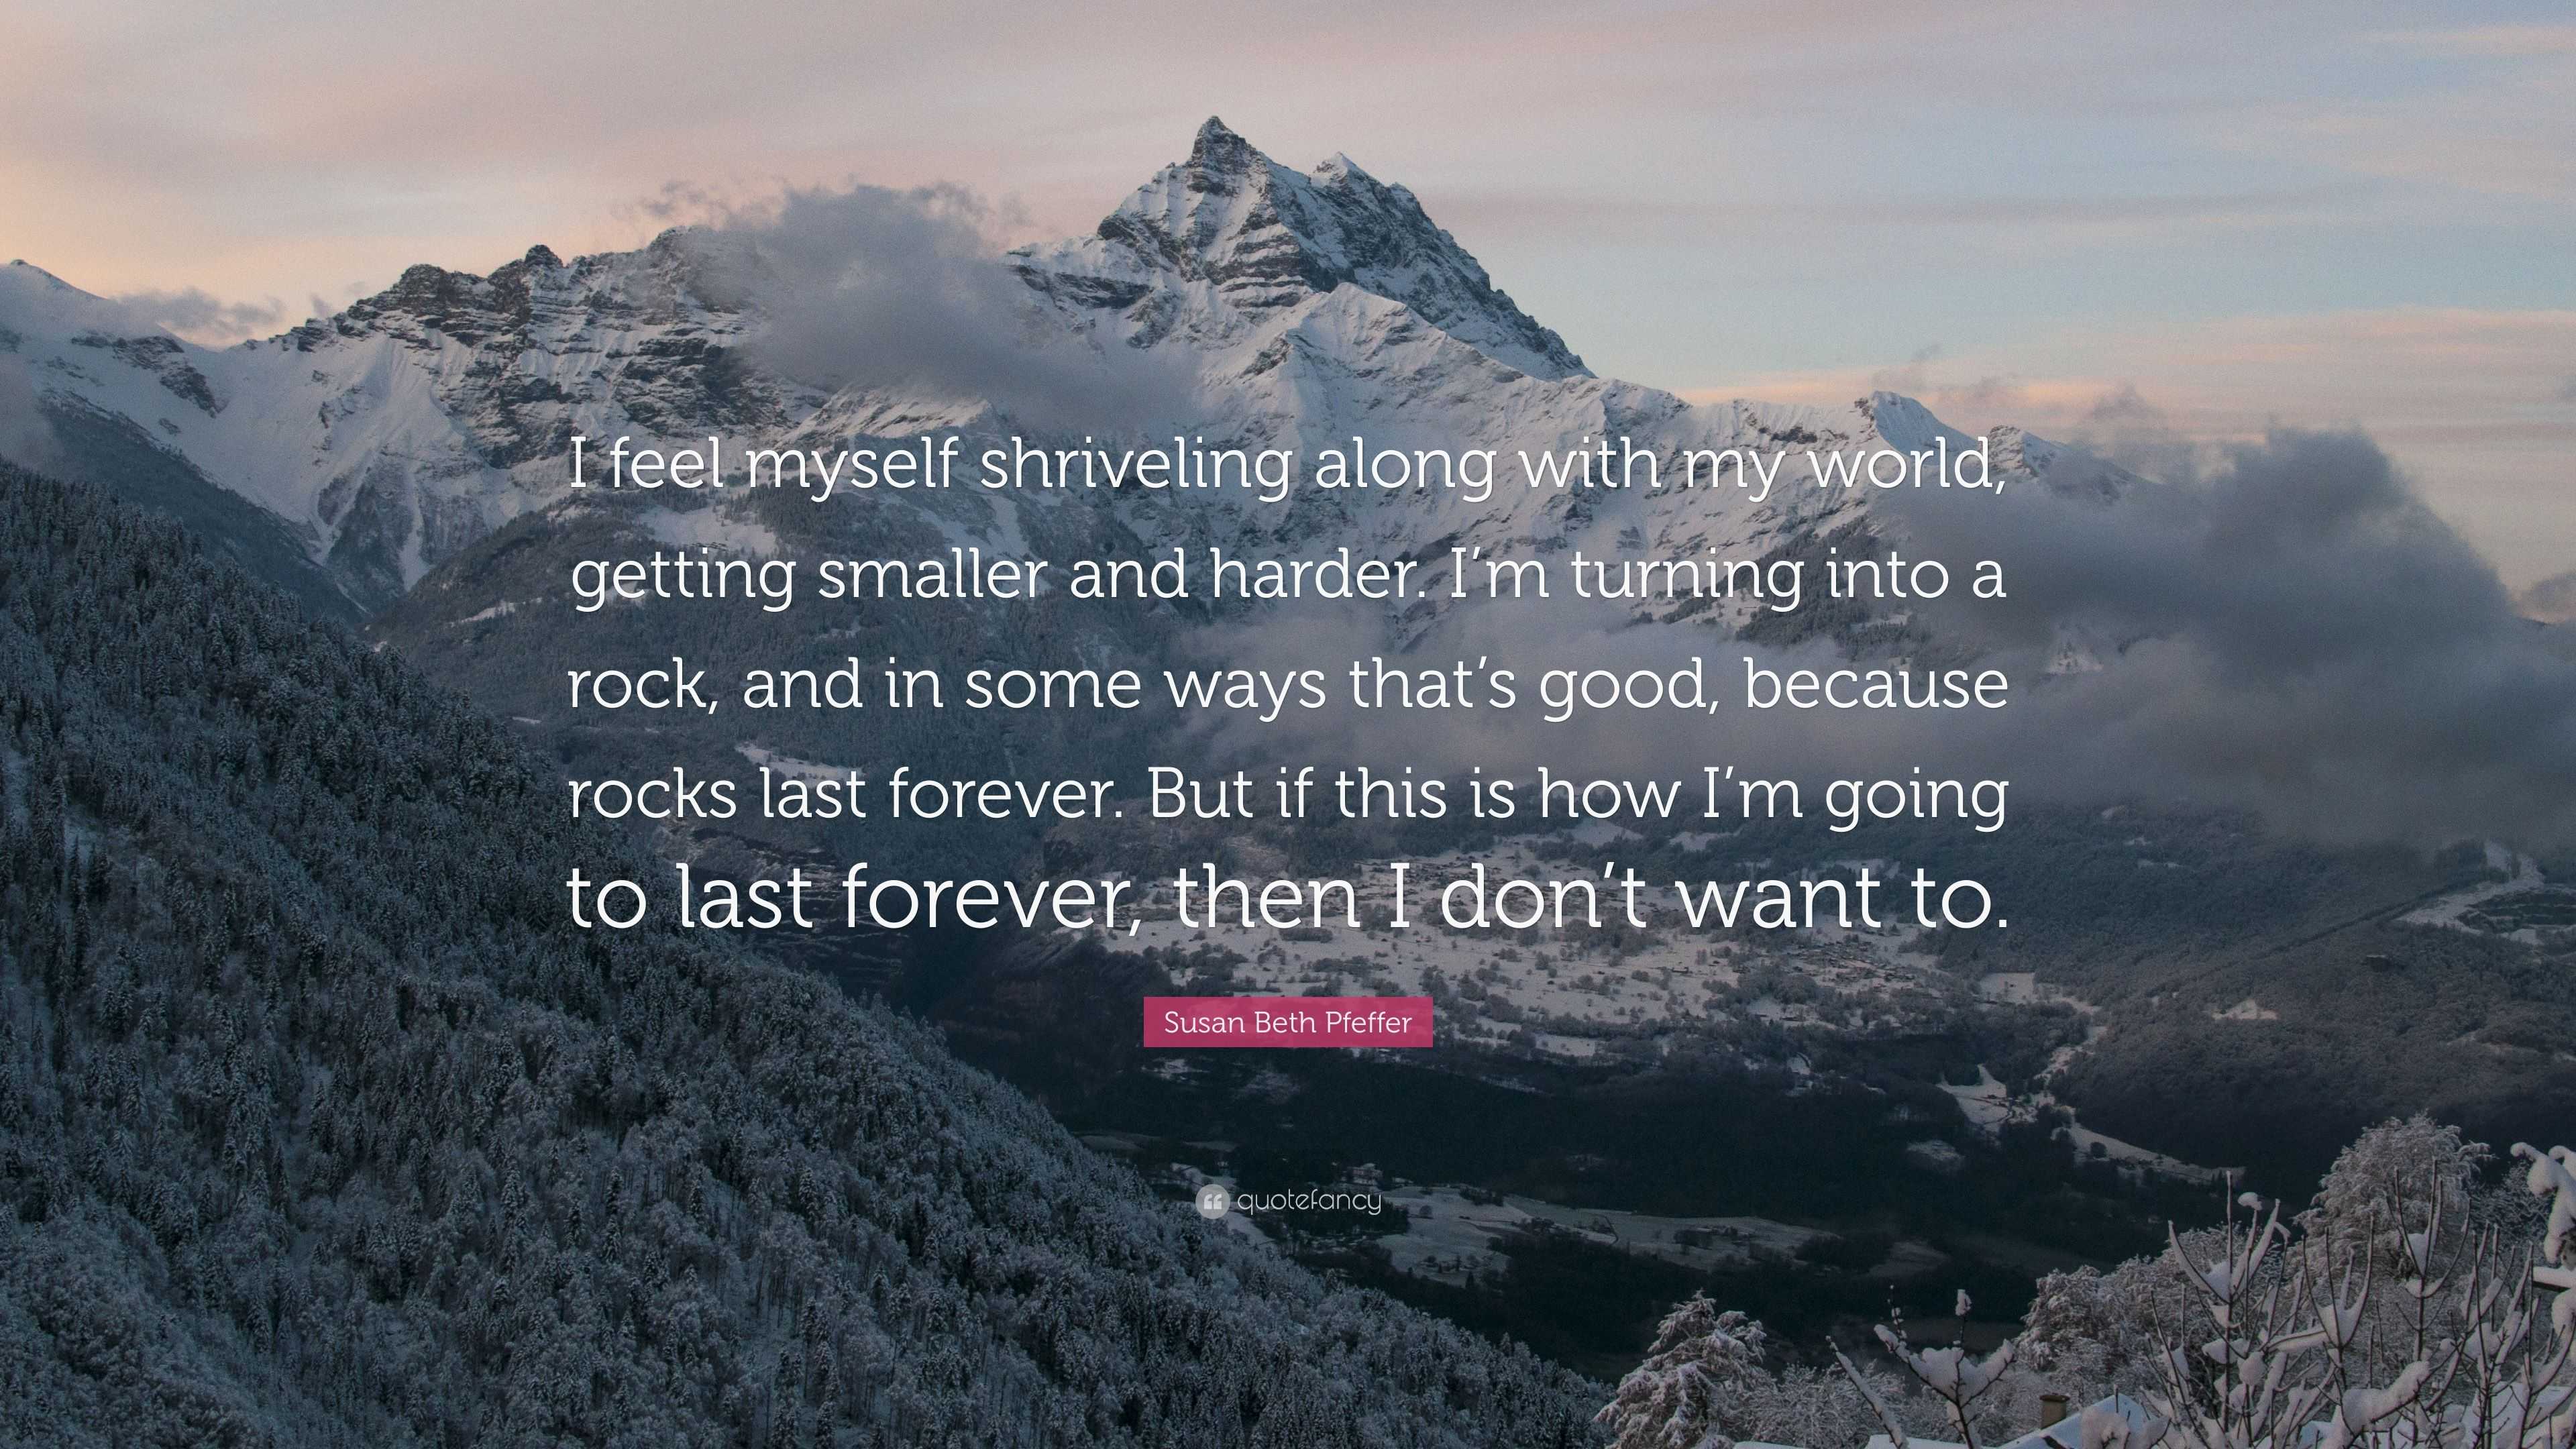 Susan Beth Pfeffer Quote: “I feel myself shriveling along with my world ...